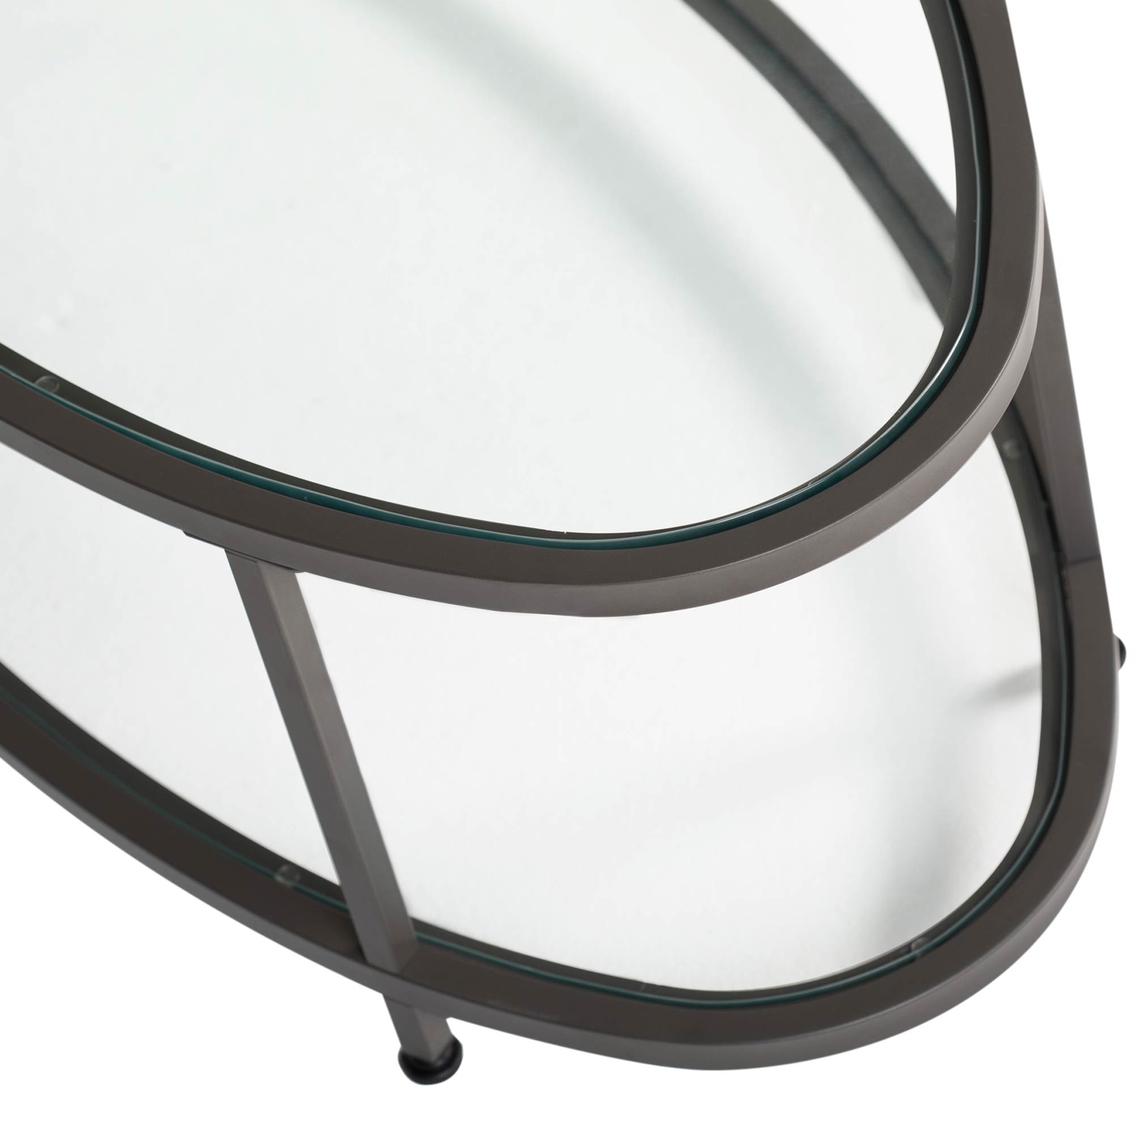 Studio Designs Home Camber 48 In. Oval Coffee Table in Pewter and Clear Glass - Image 3 of 4